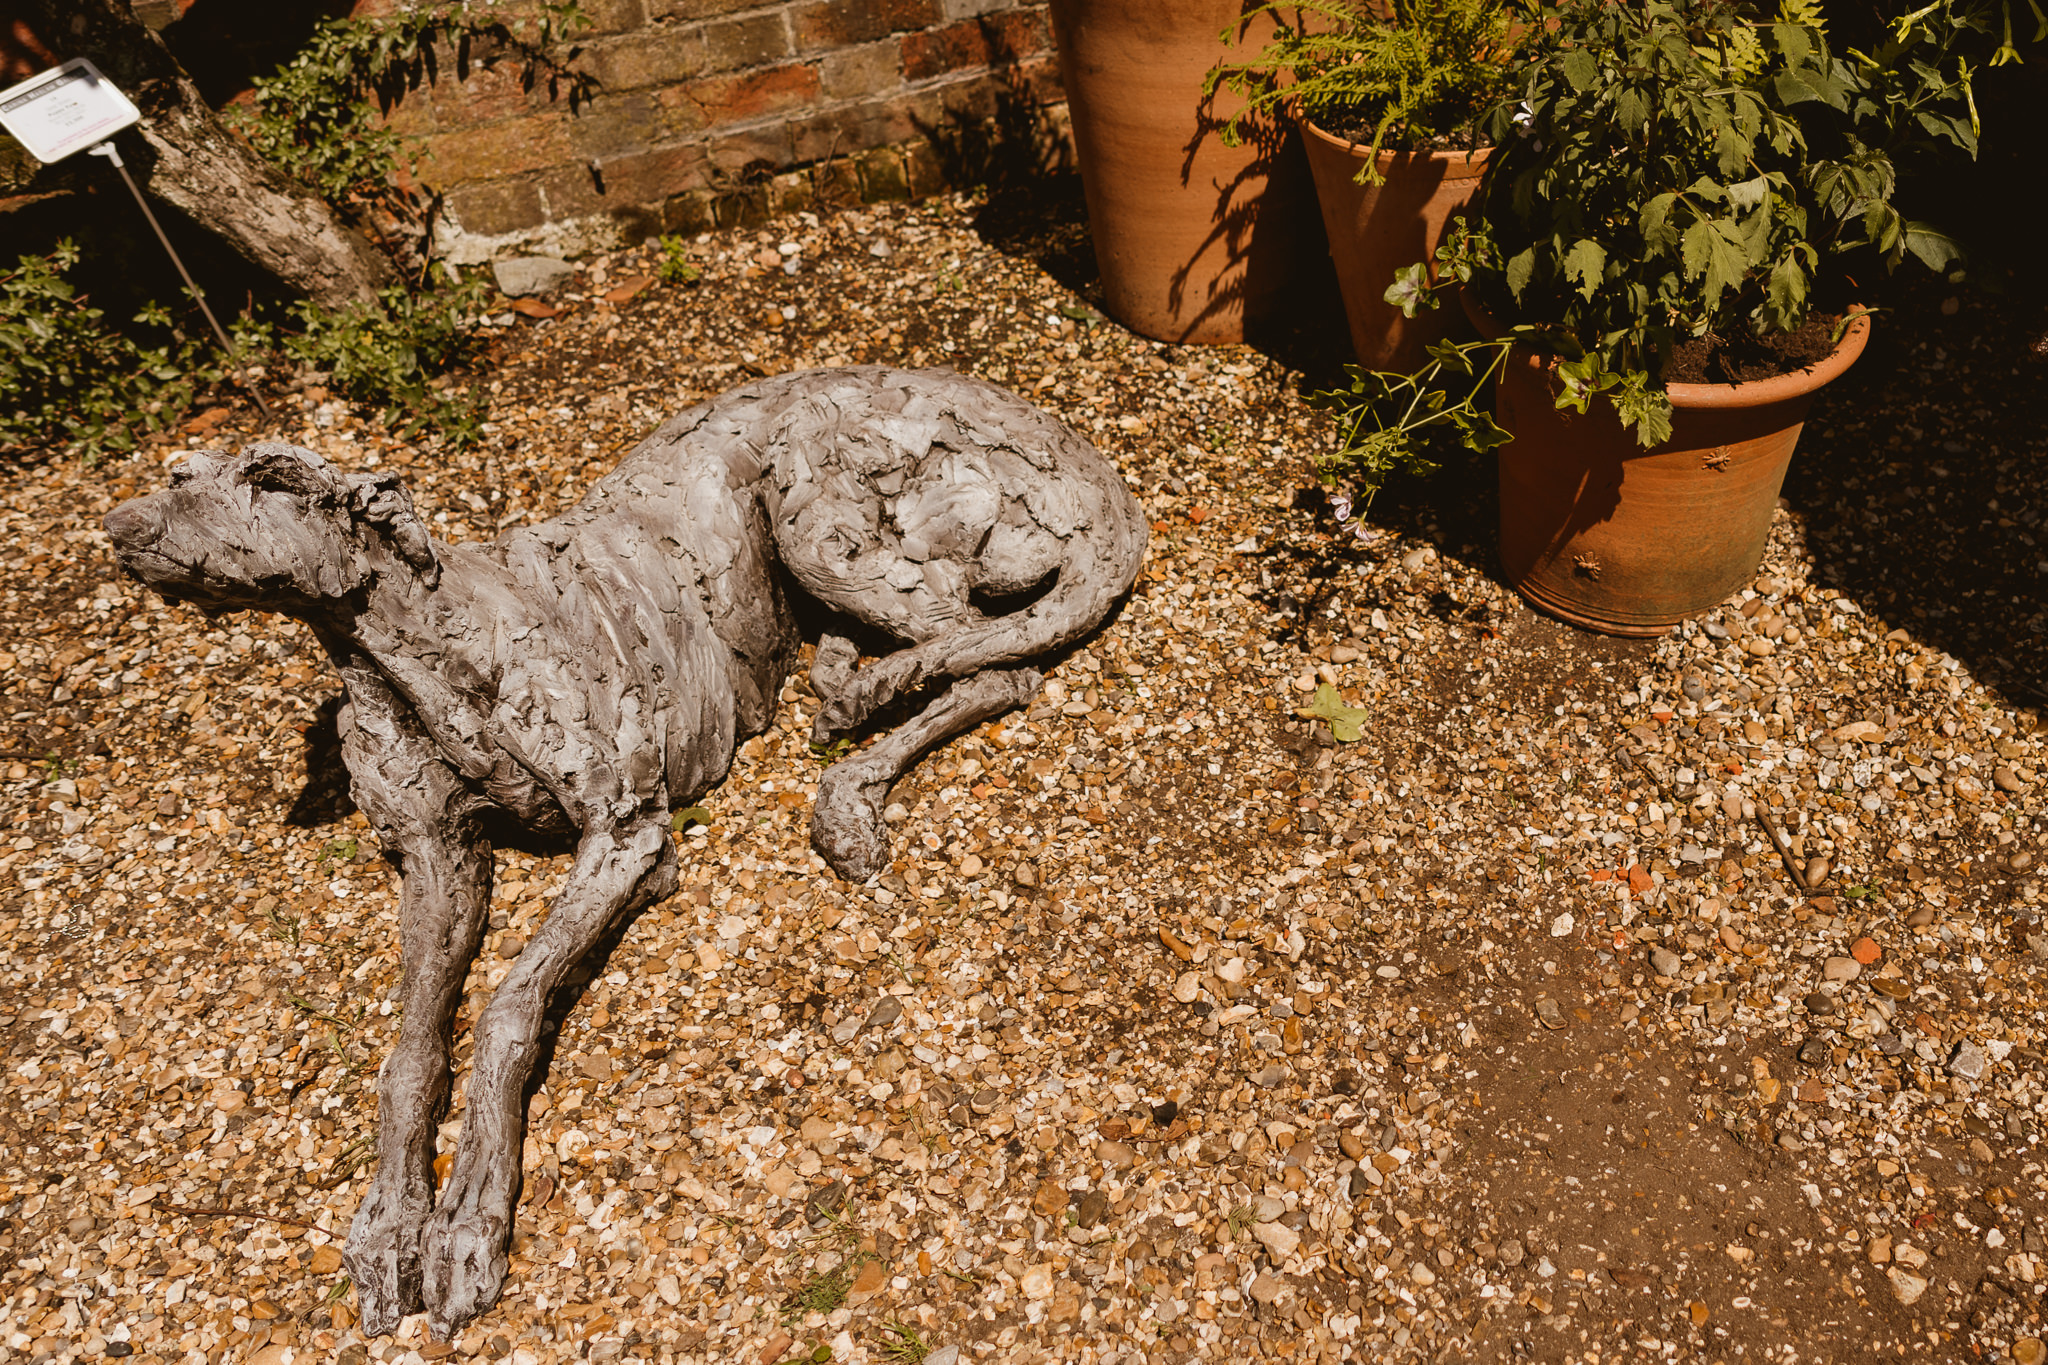 Awesome sculpture at Chenies Manor House, Buckinghamshire